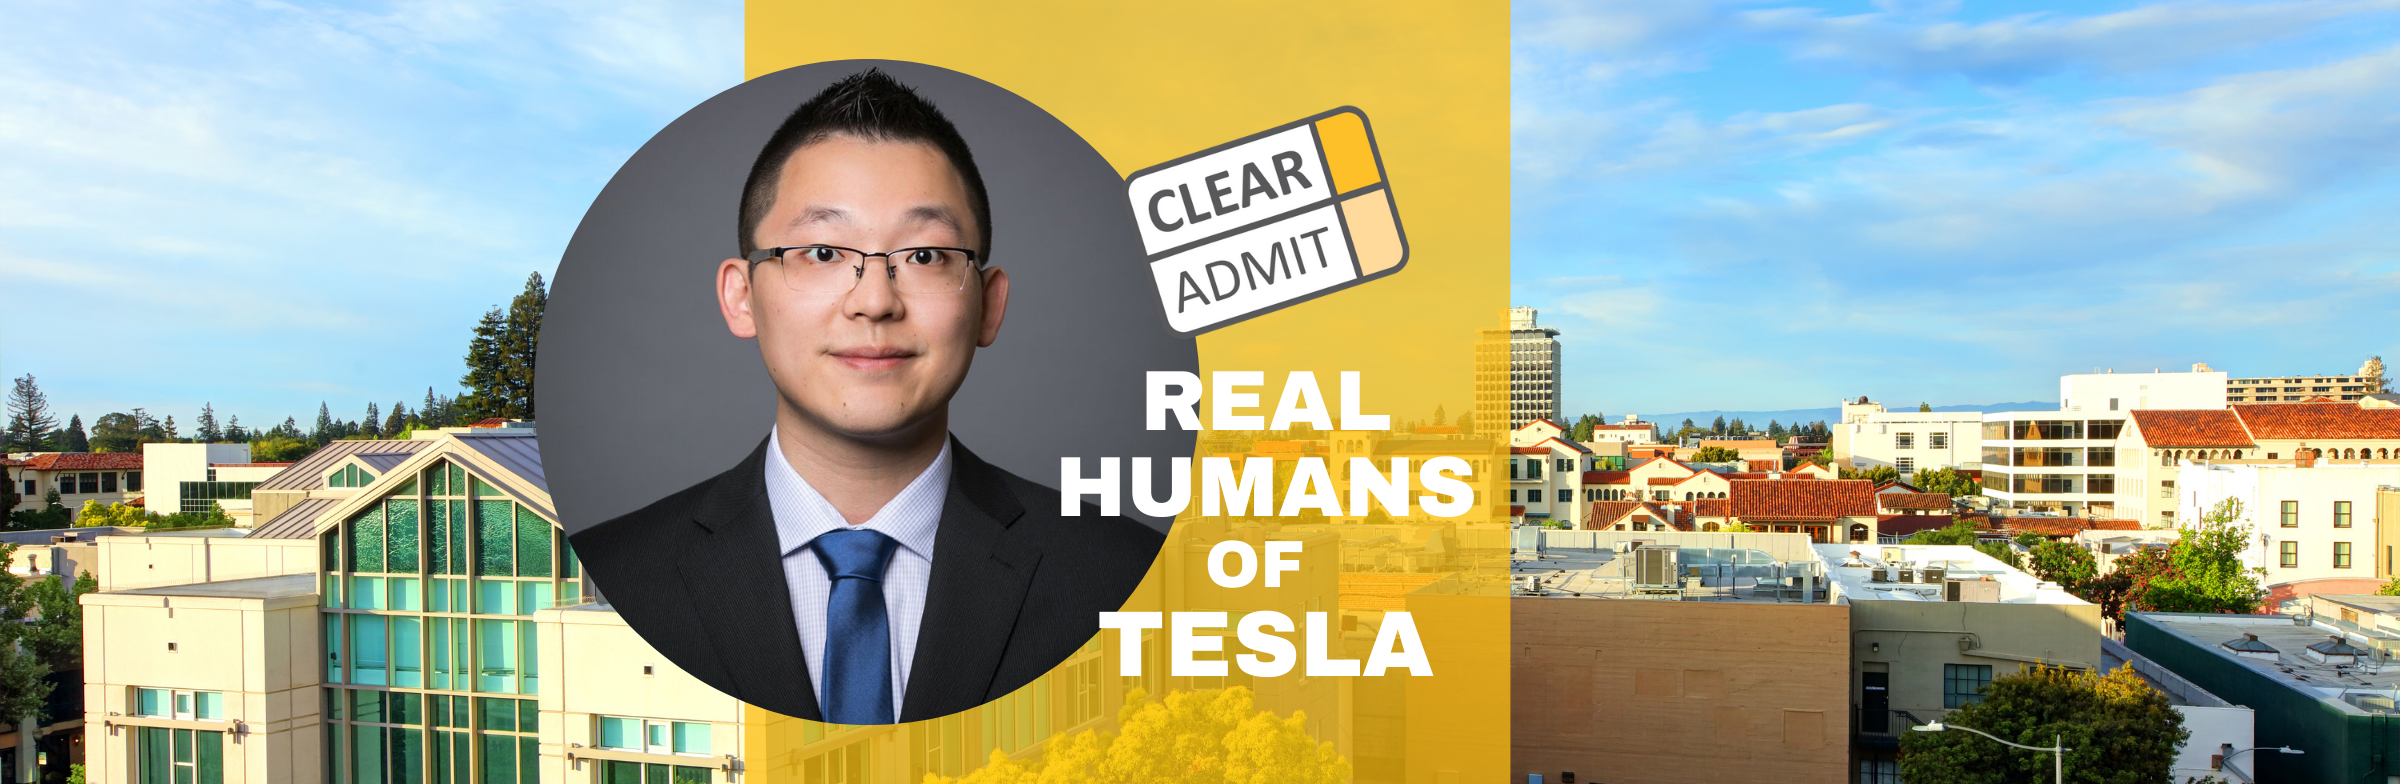 Image for Real Humans of Tesla: Jia Huang, Cornell Johnson MBA ‘20, Business Operations & Finance Associate